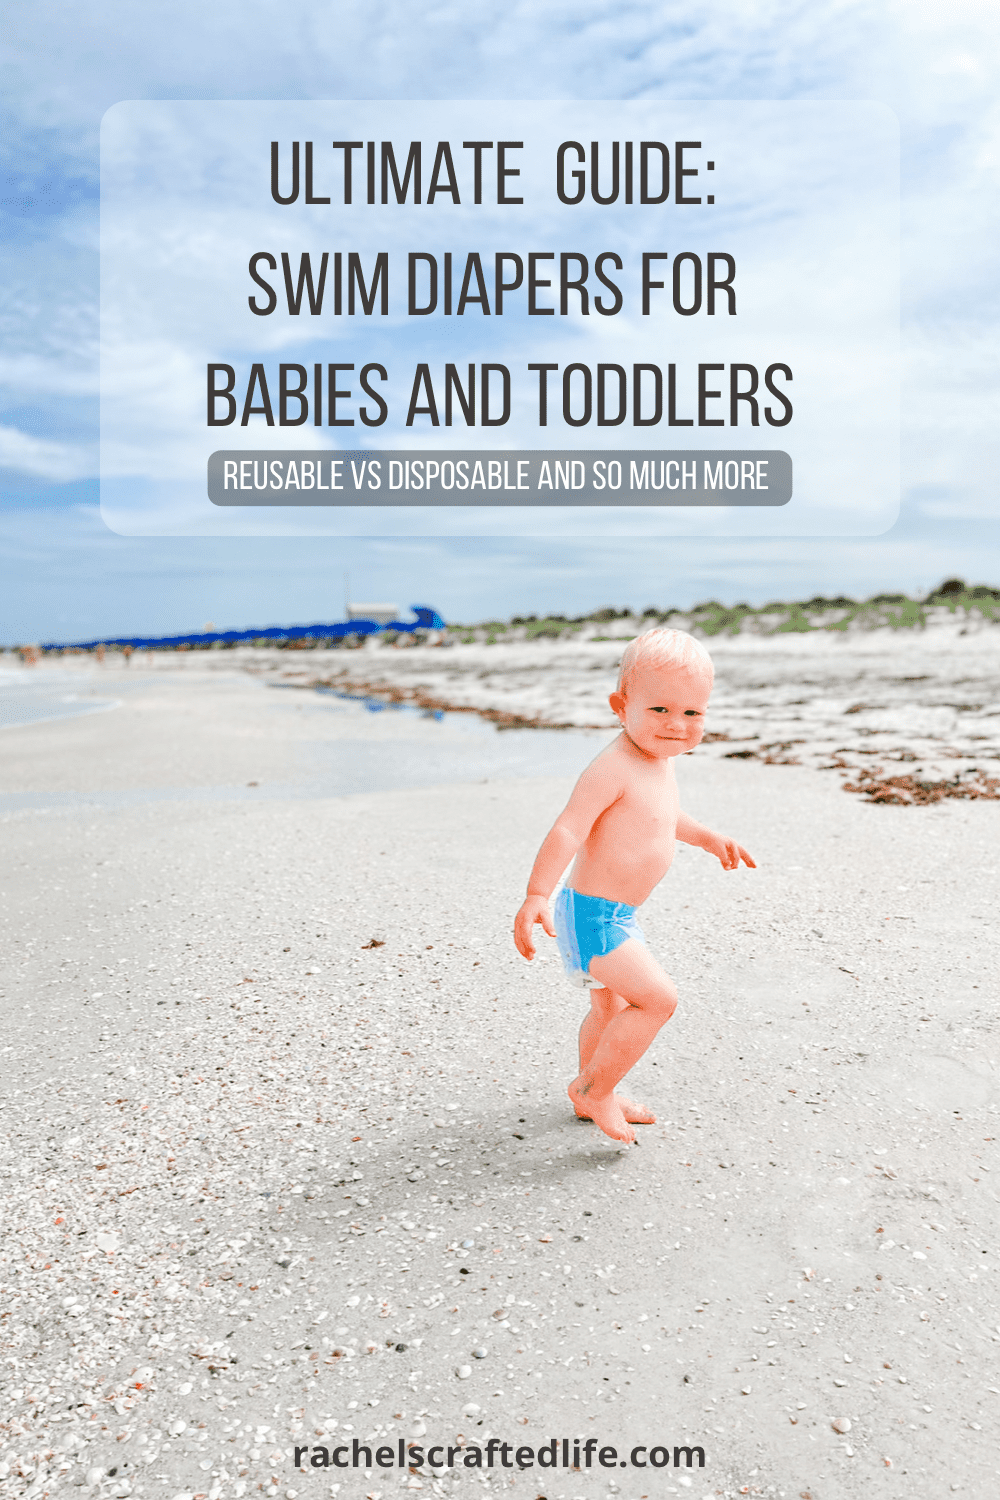 https://rachelscraftedlife.com/wp-content/uploads/2022/07/reusable-disposable-swim-diapers-for-babies-and-toddlers.png